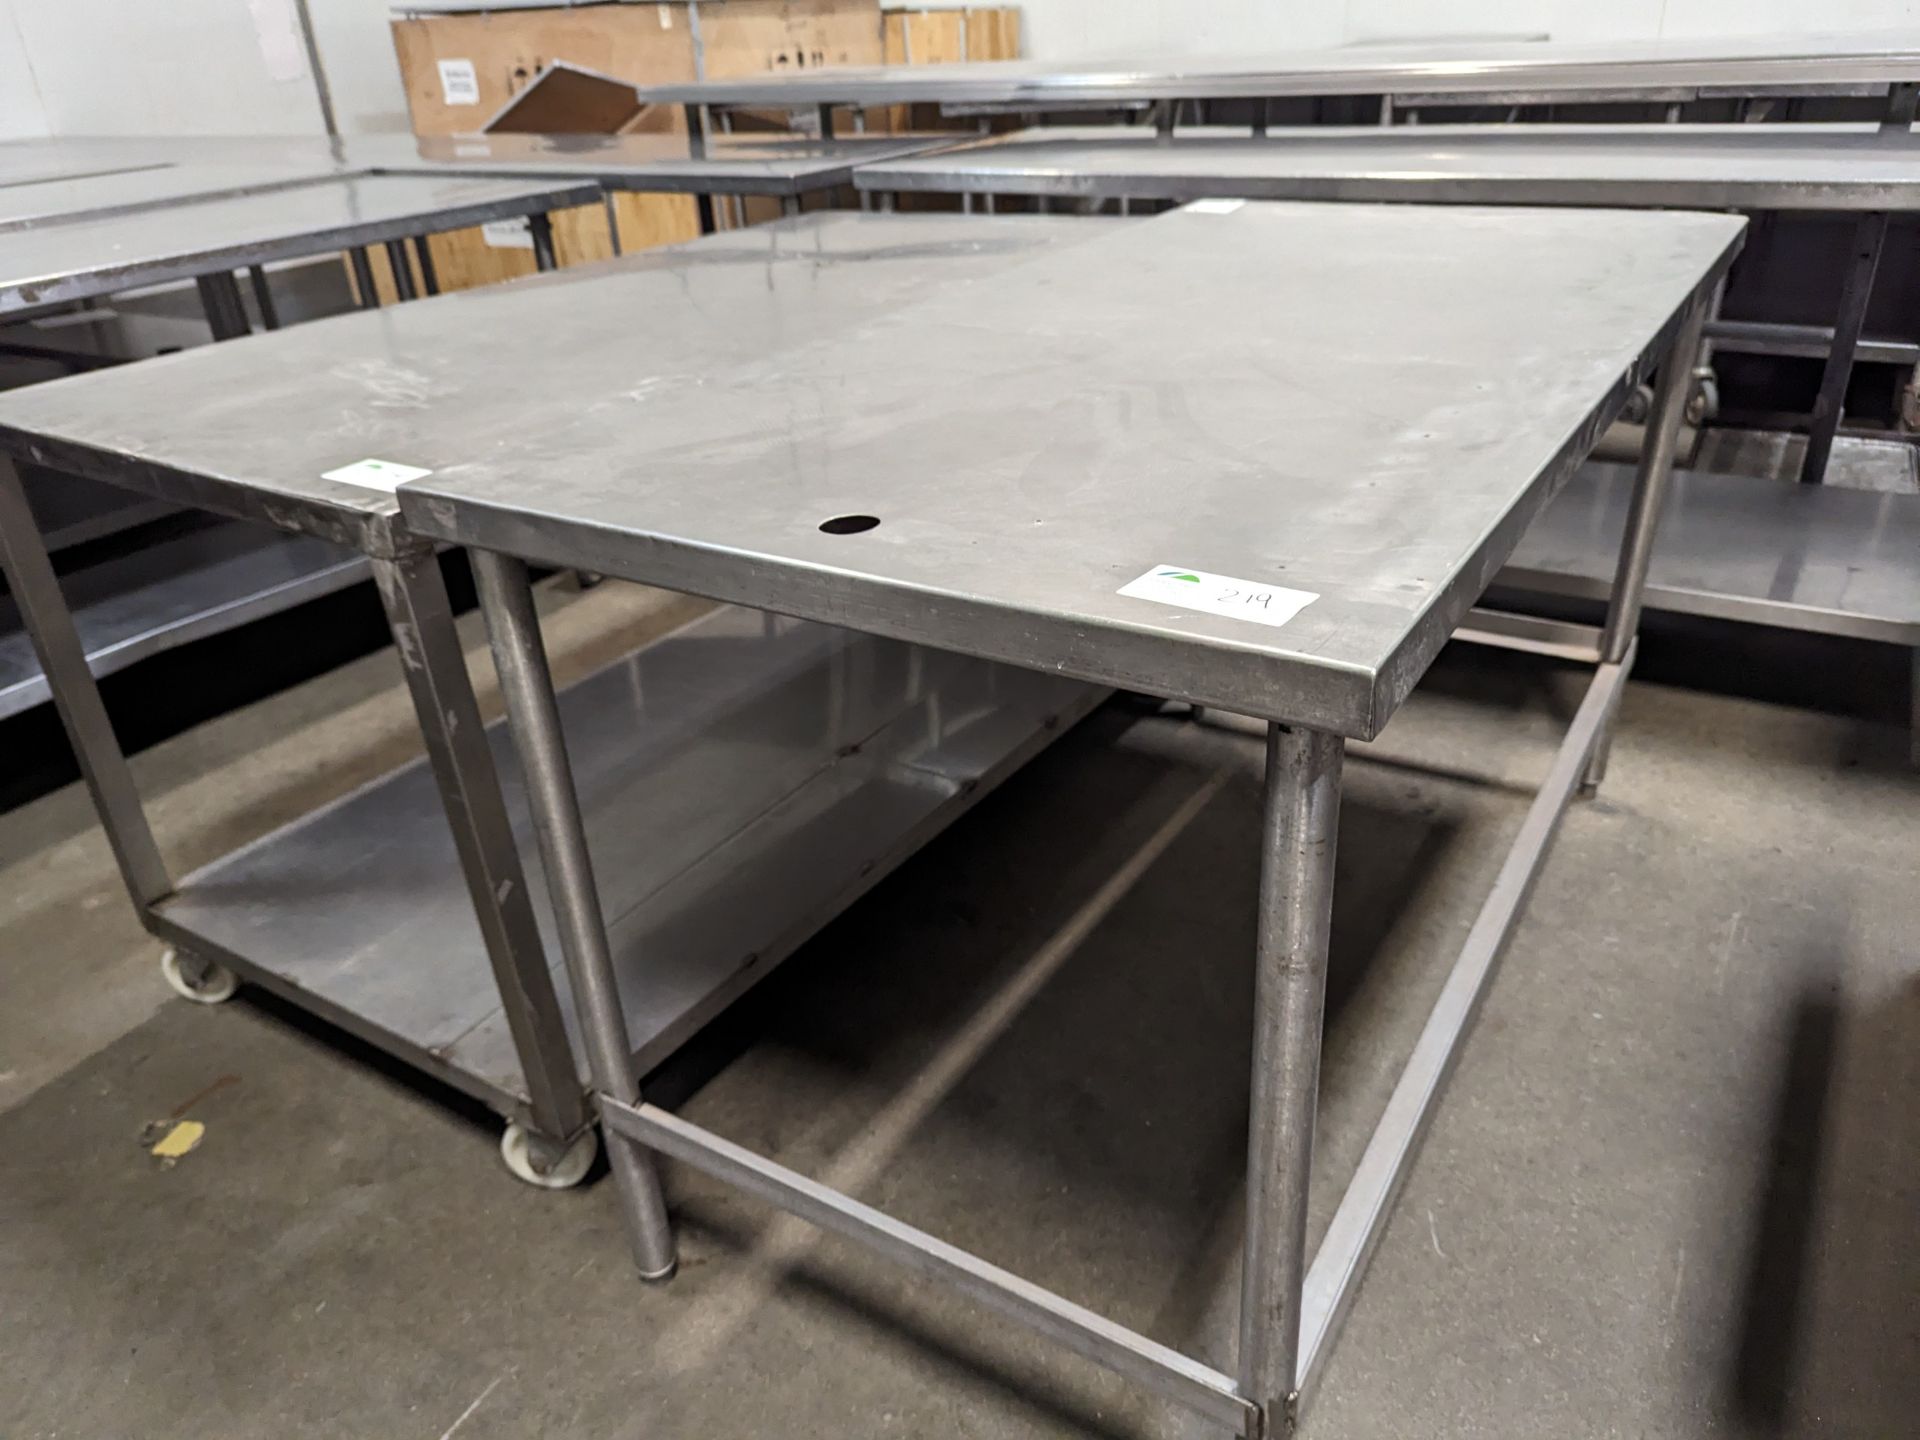 Lot of 2 5ft Long SS Tables, Dimensions LxWxH: 60x32x34 each - Image 2 of 7